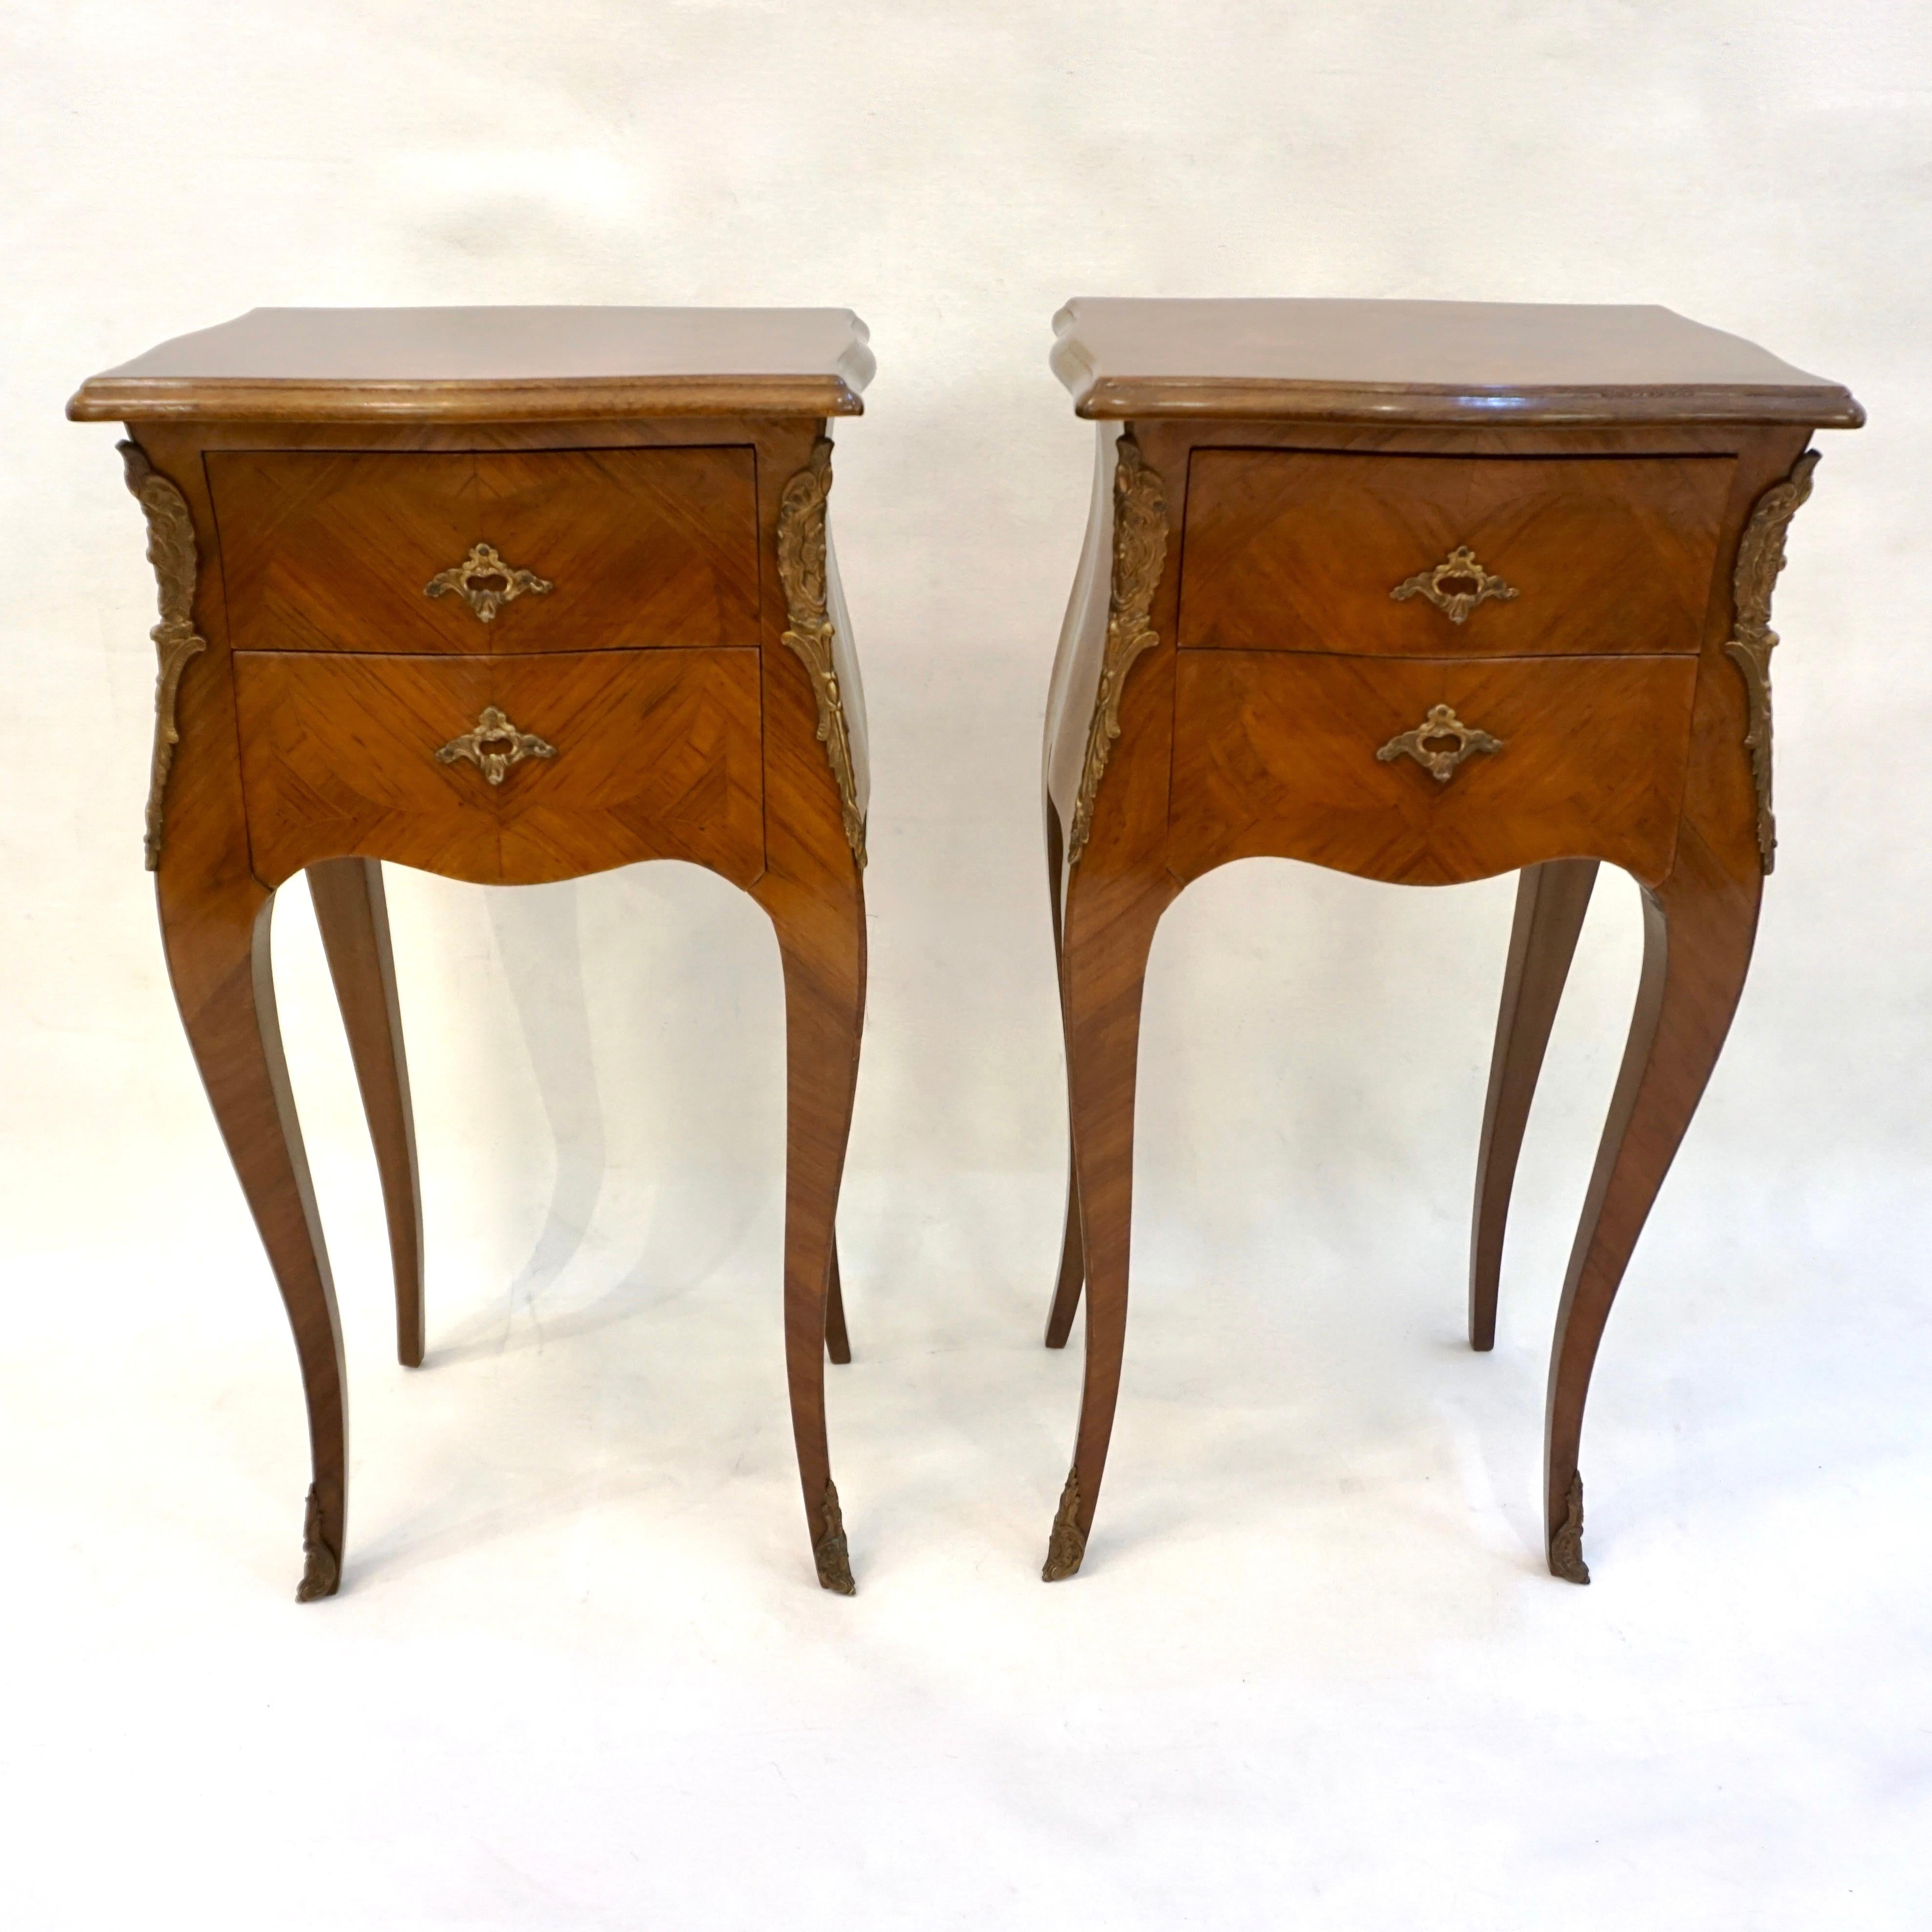 1940 French Louis XV Revival Pair of Inlaid Rosewood Walnut 2-Drawer Side Tables 8